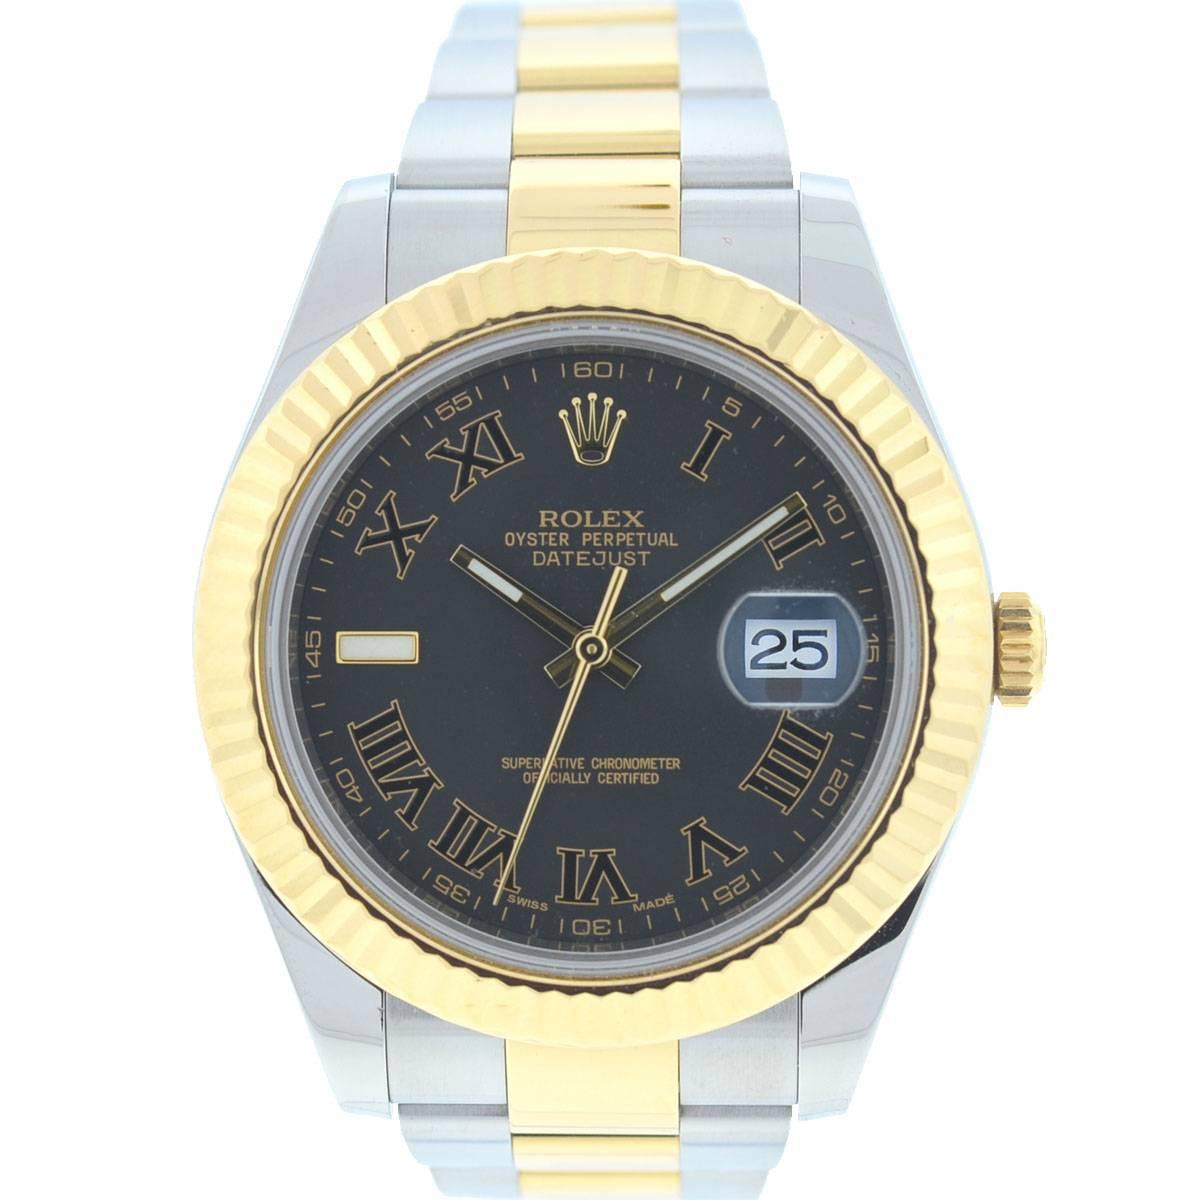 Rolex 116333 Datejust II Two-Tone Gold and Stainless Steel Automatic Watch